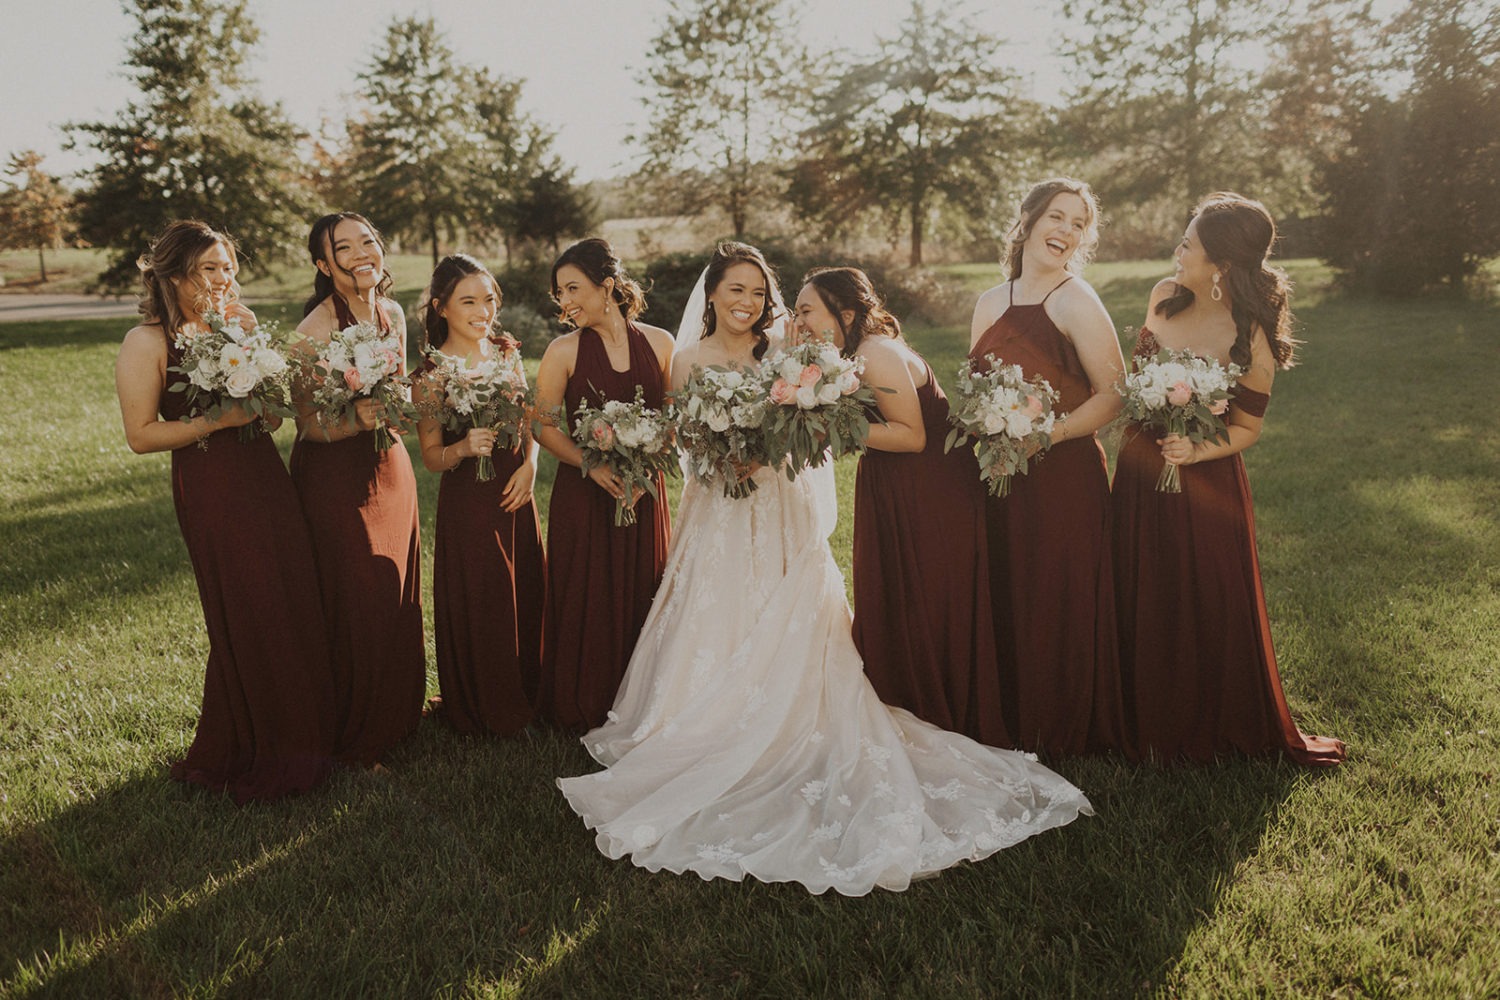 Bride and bridesmaids hold bouquets at outdoor wedding